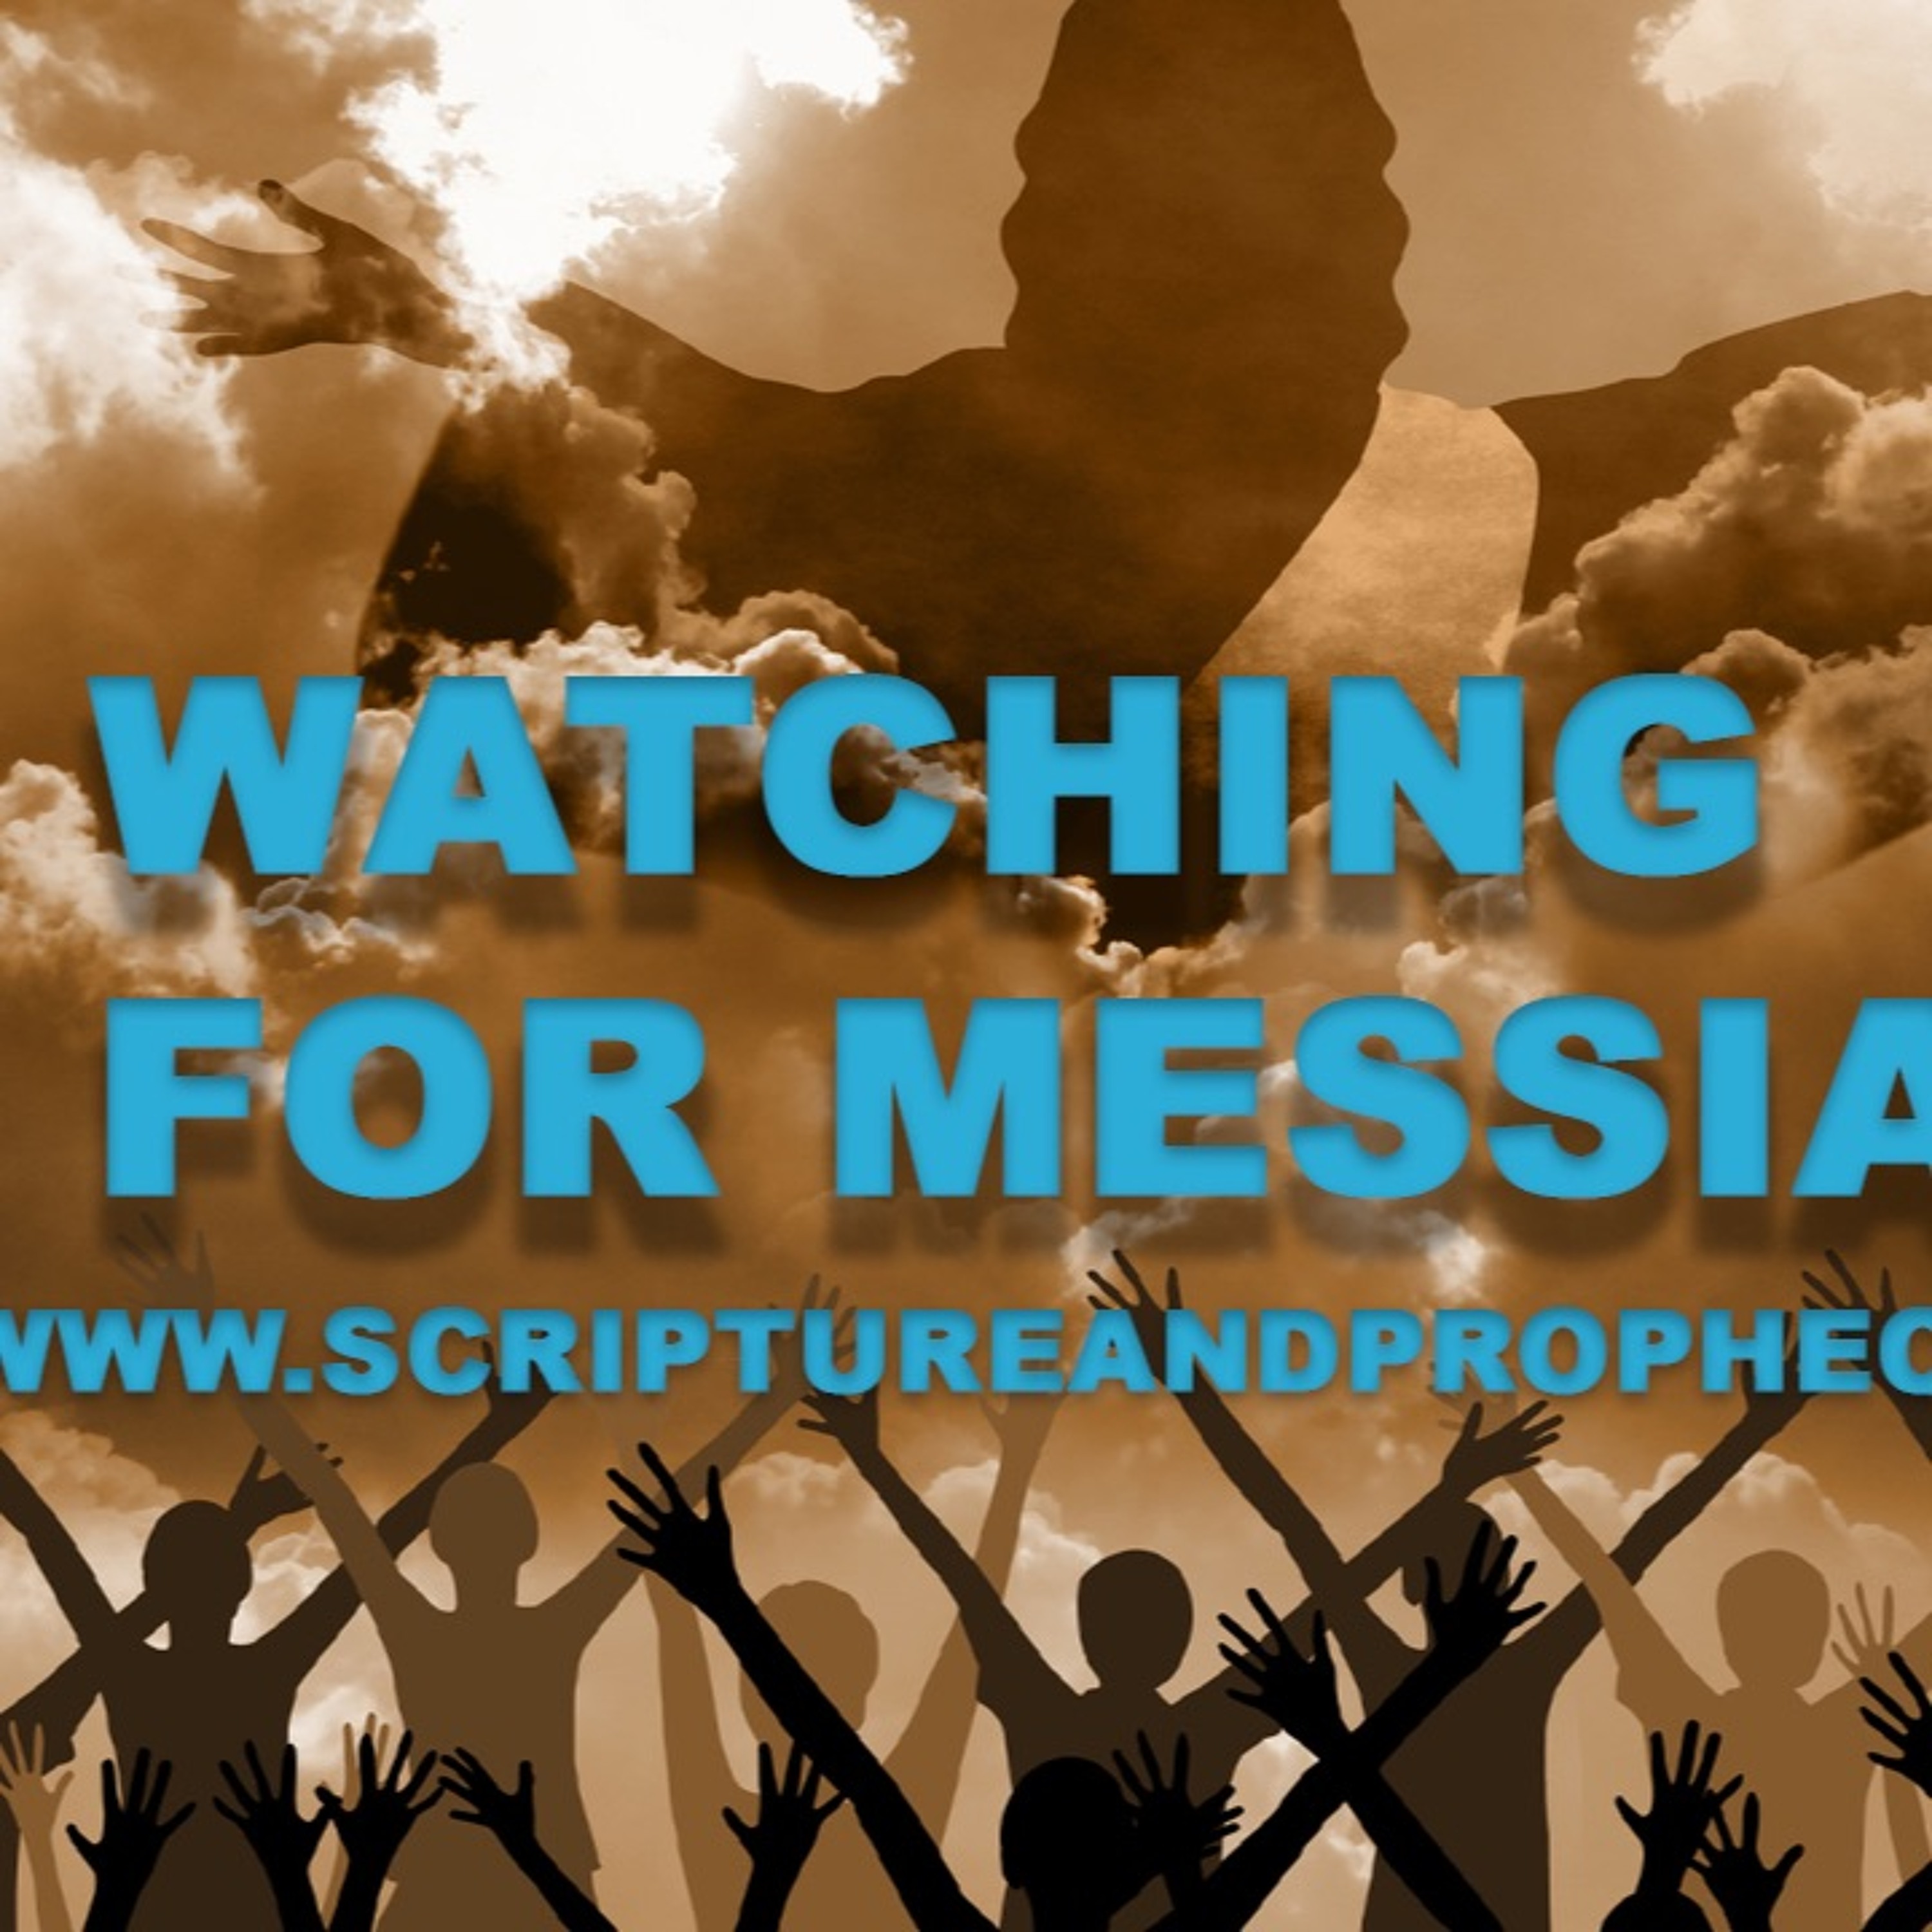 Warning In Thinking, The Lord Delayeth His Coming - Watching For Messiah - Part 2 (Rebroadcast 2019)